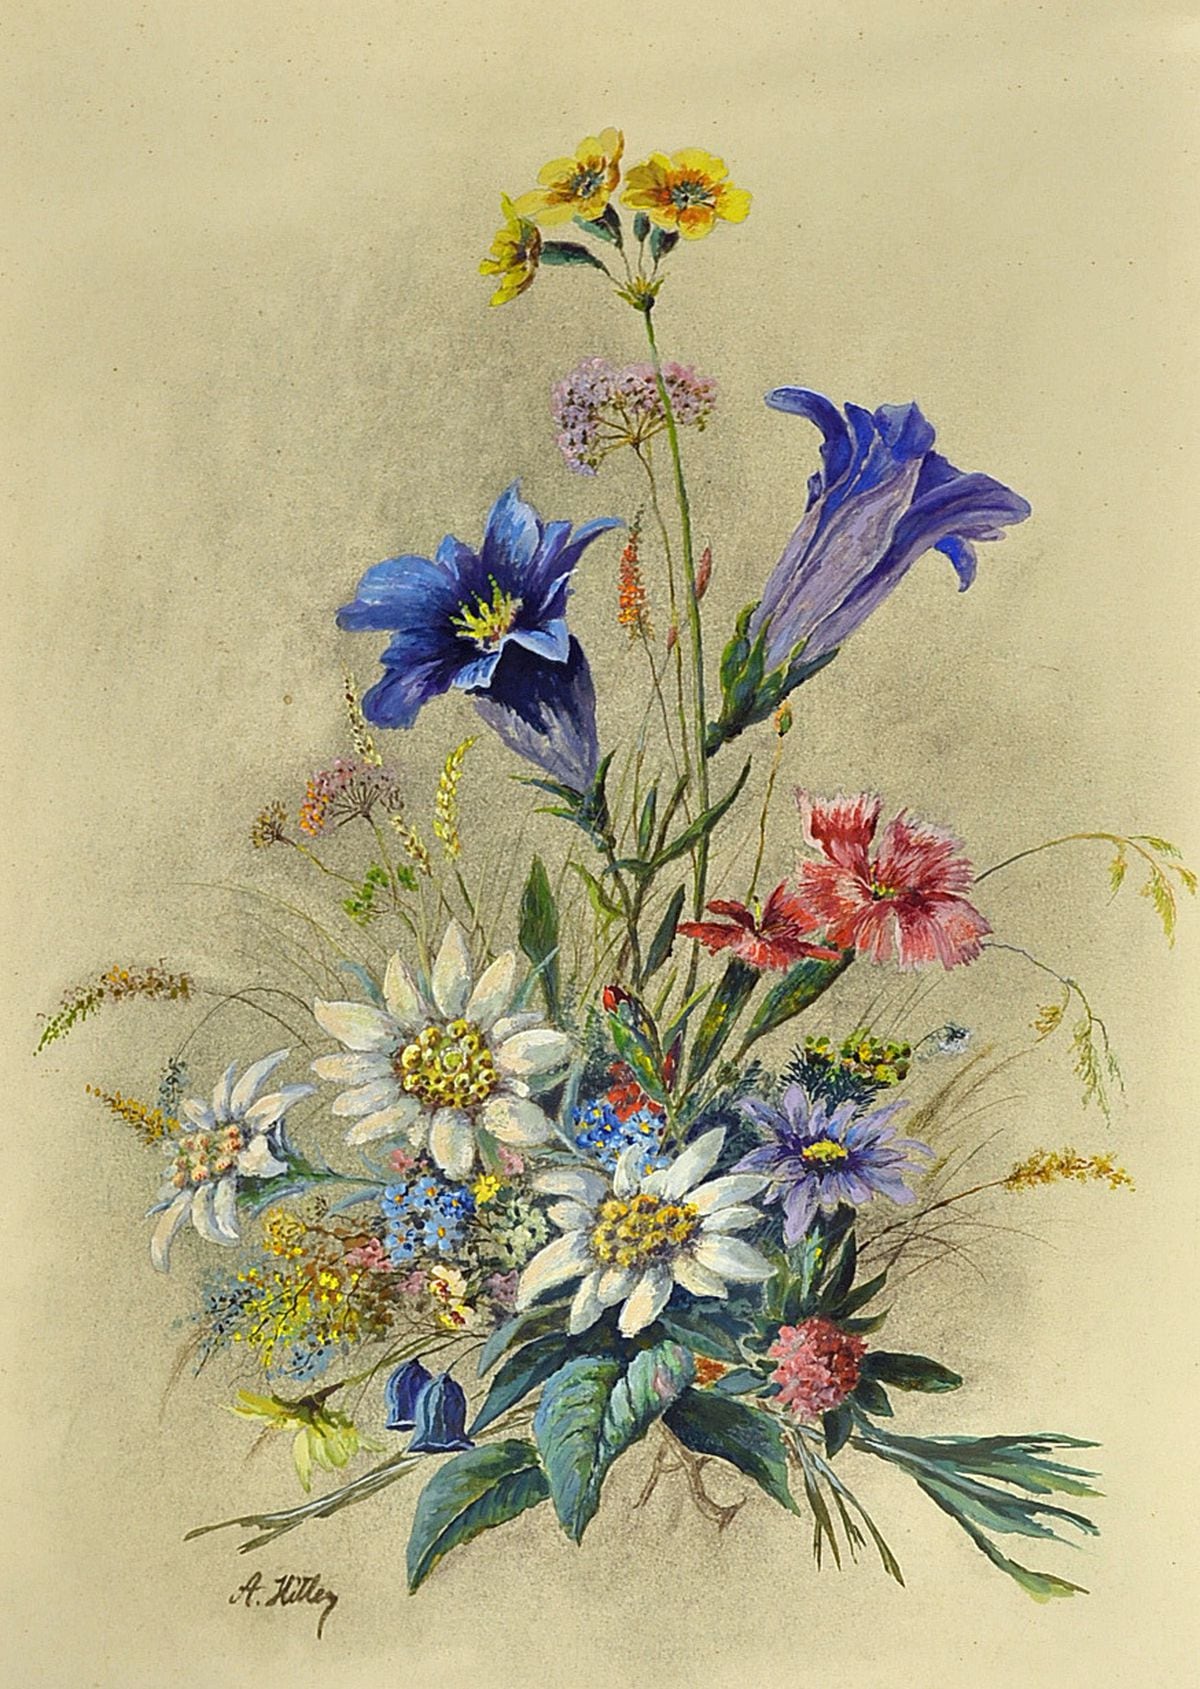 An artwork attributed to Adolf Hitler of an Alpine bouquet with edelweiss